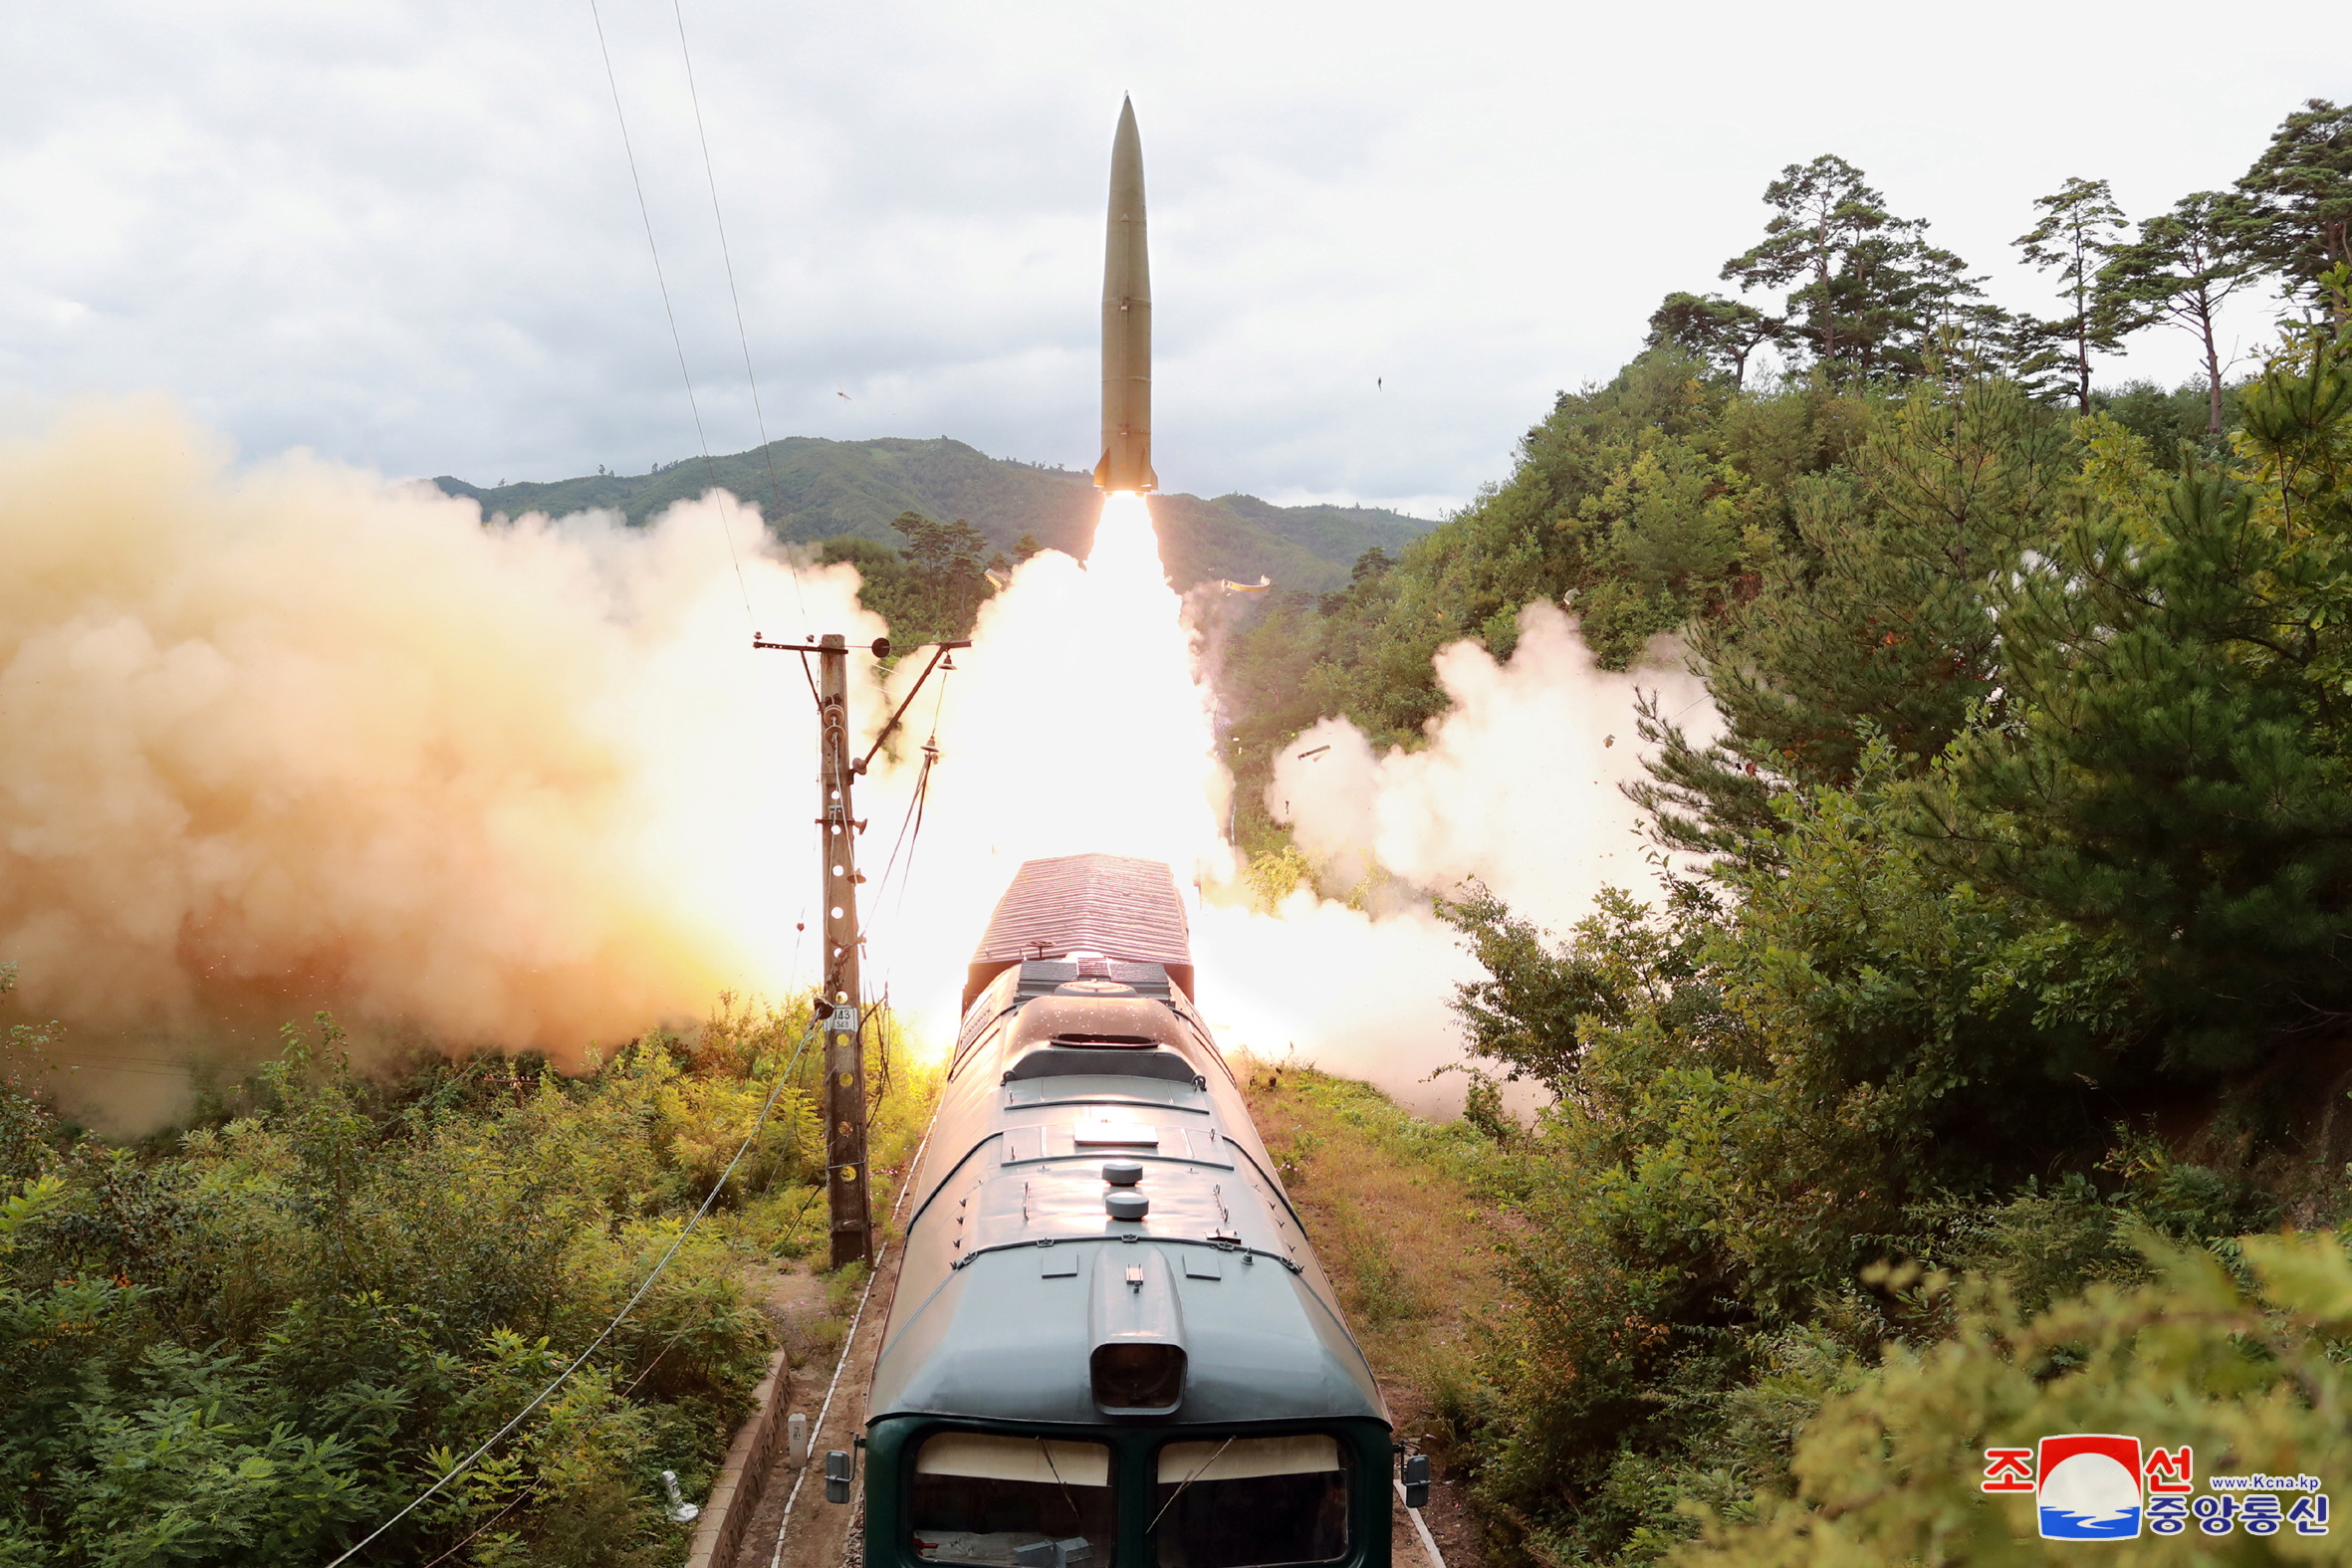 A missile is seen launched during a drill of the Railway Mobile Missile Regiment in North Korea